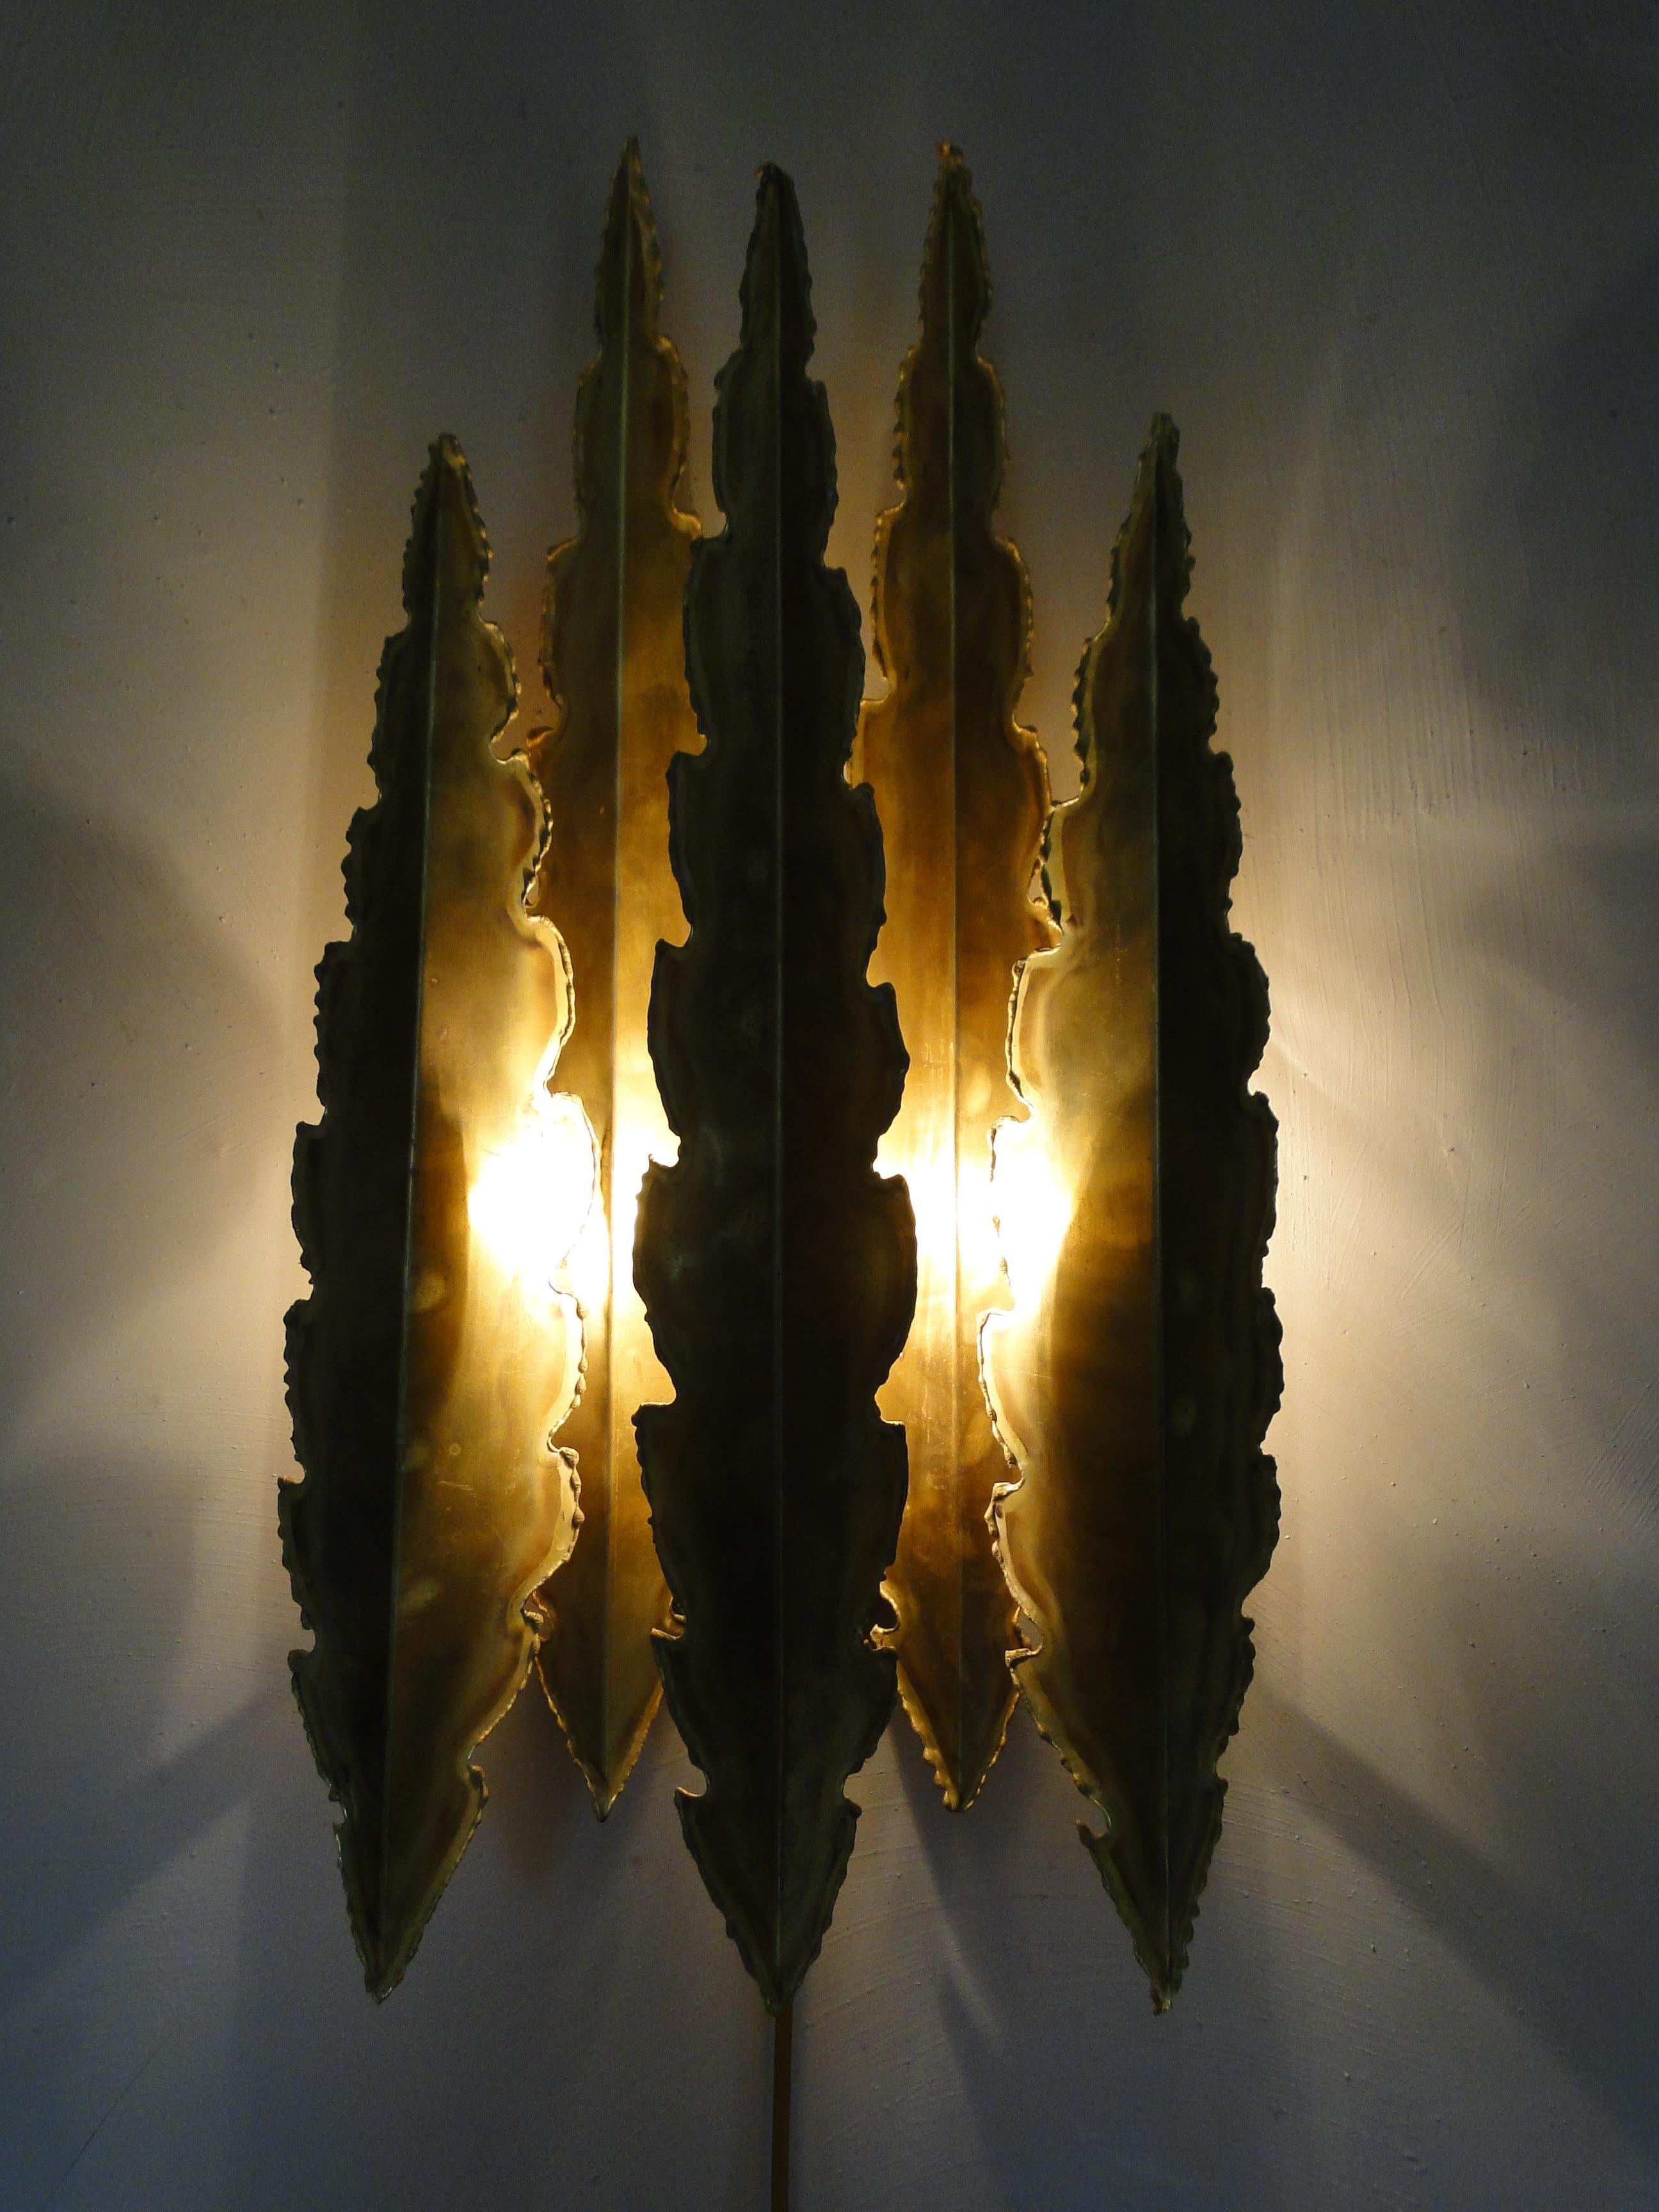 Mid-Century Modern Large Brass Wall Lamp by Svend Aage Holm Sorensen 1960 Denmark  For Sale